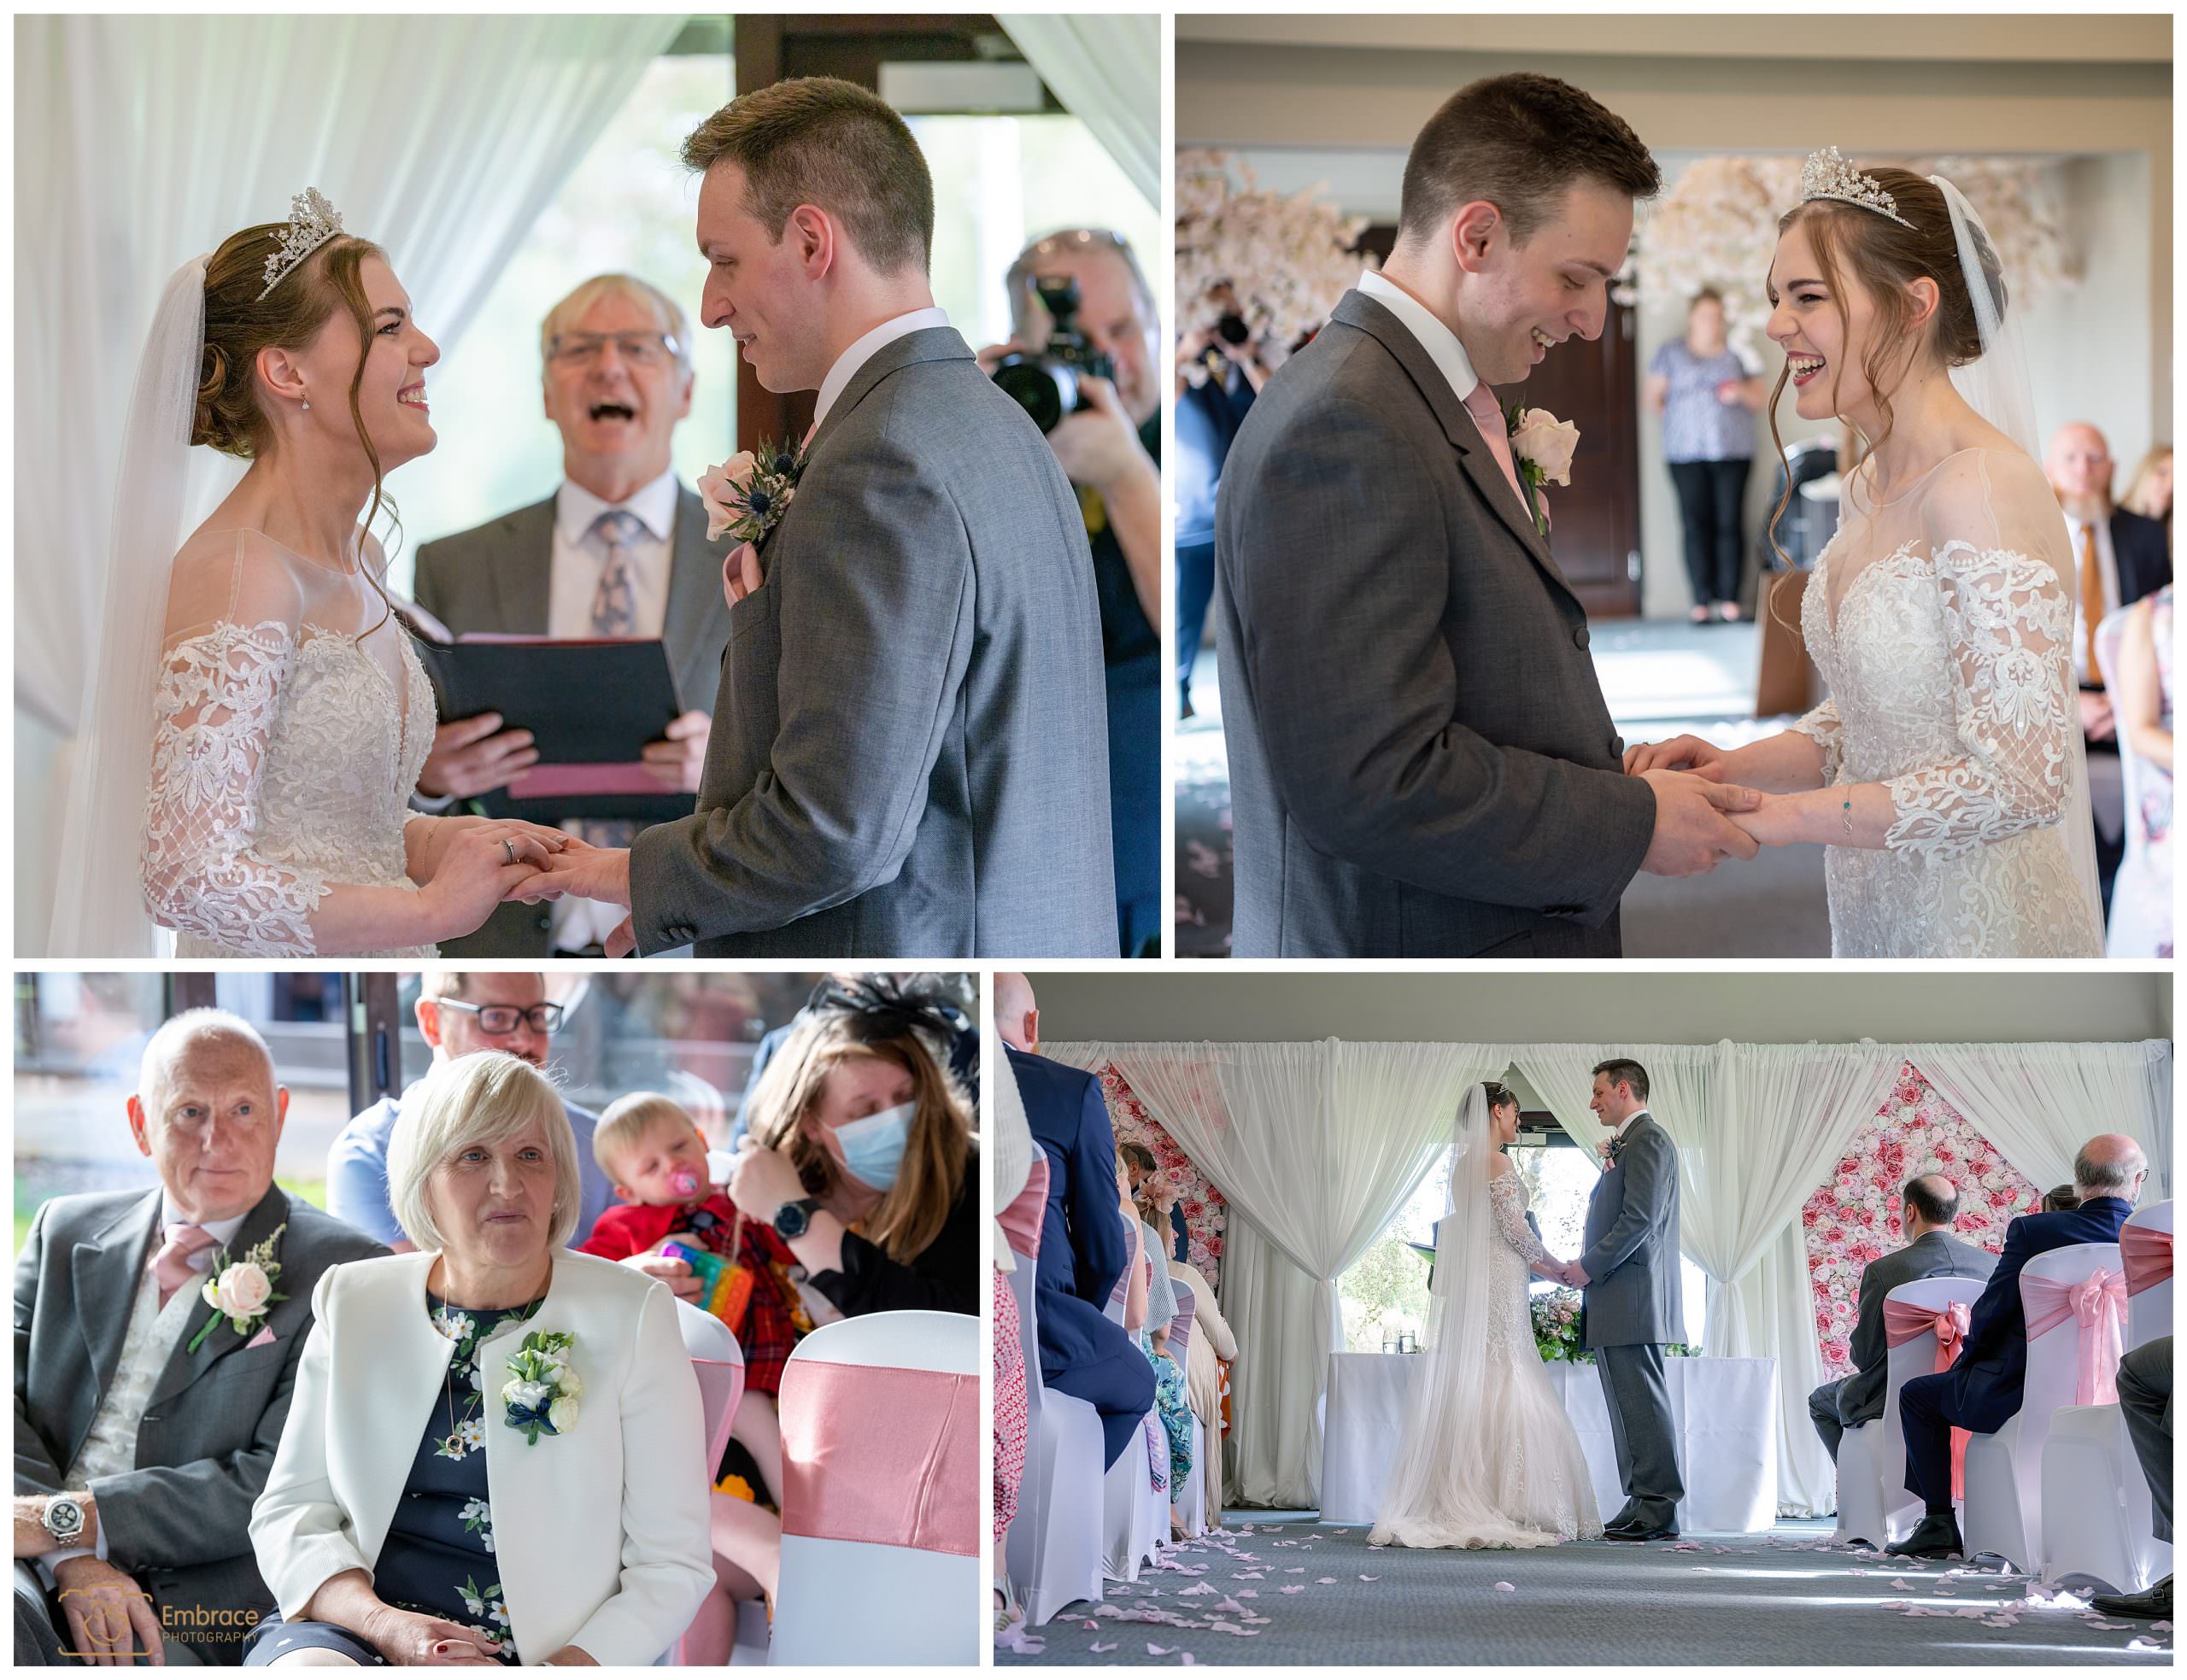 Bride putting the ring on the grooms finger during wedding ceremony at Barnham Broom